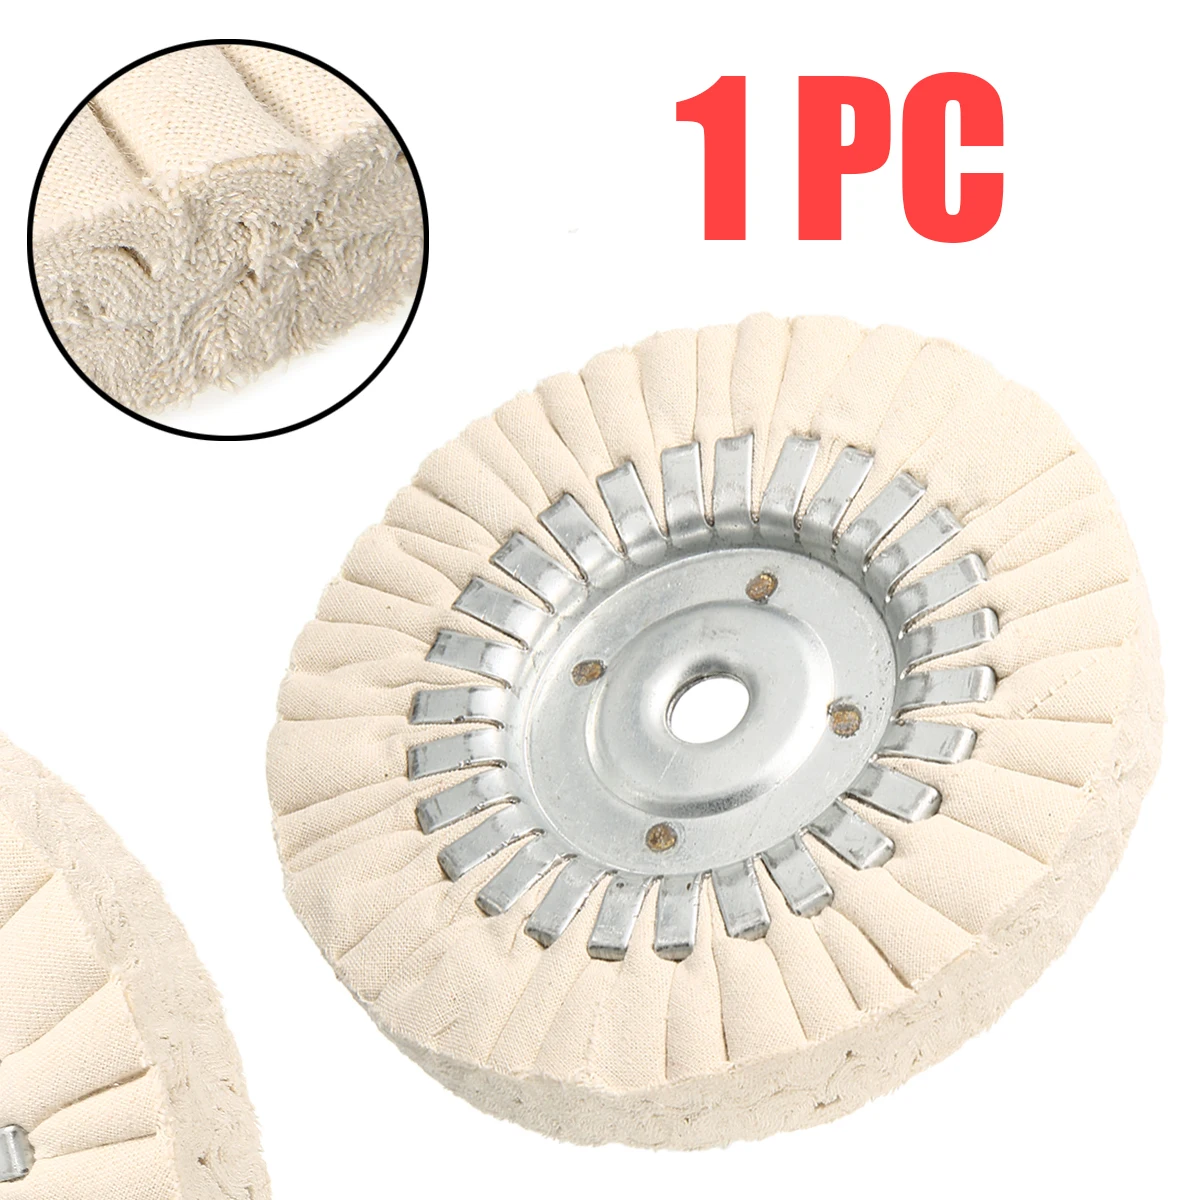 1pc 6 inch Cotton Polishing Wheel 6 Inch Jewelry Wood Metal Polisher Buffing Grinding Wheels 25mm Thickness